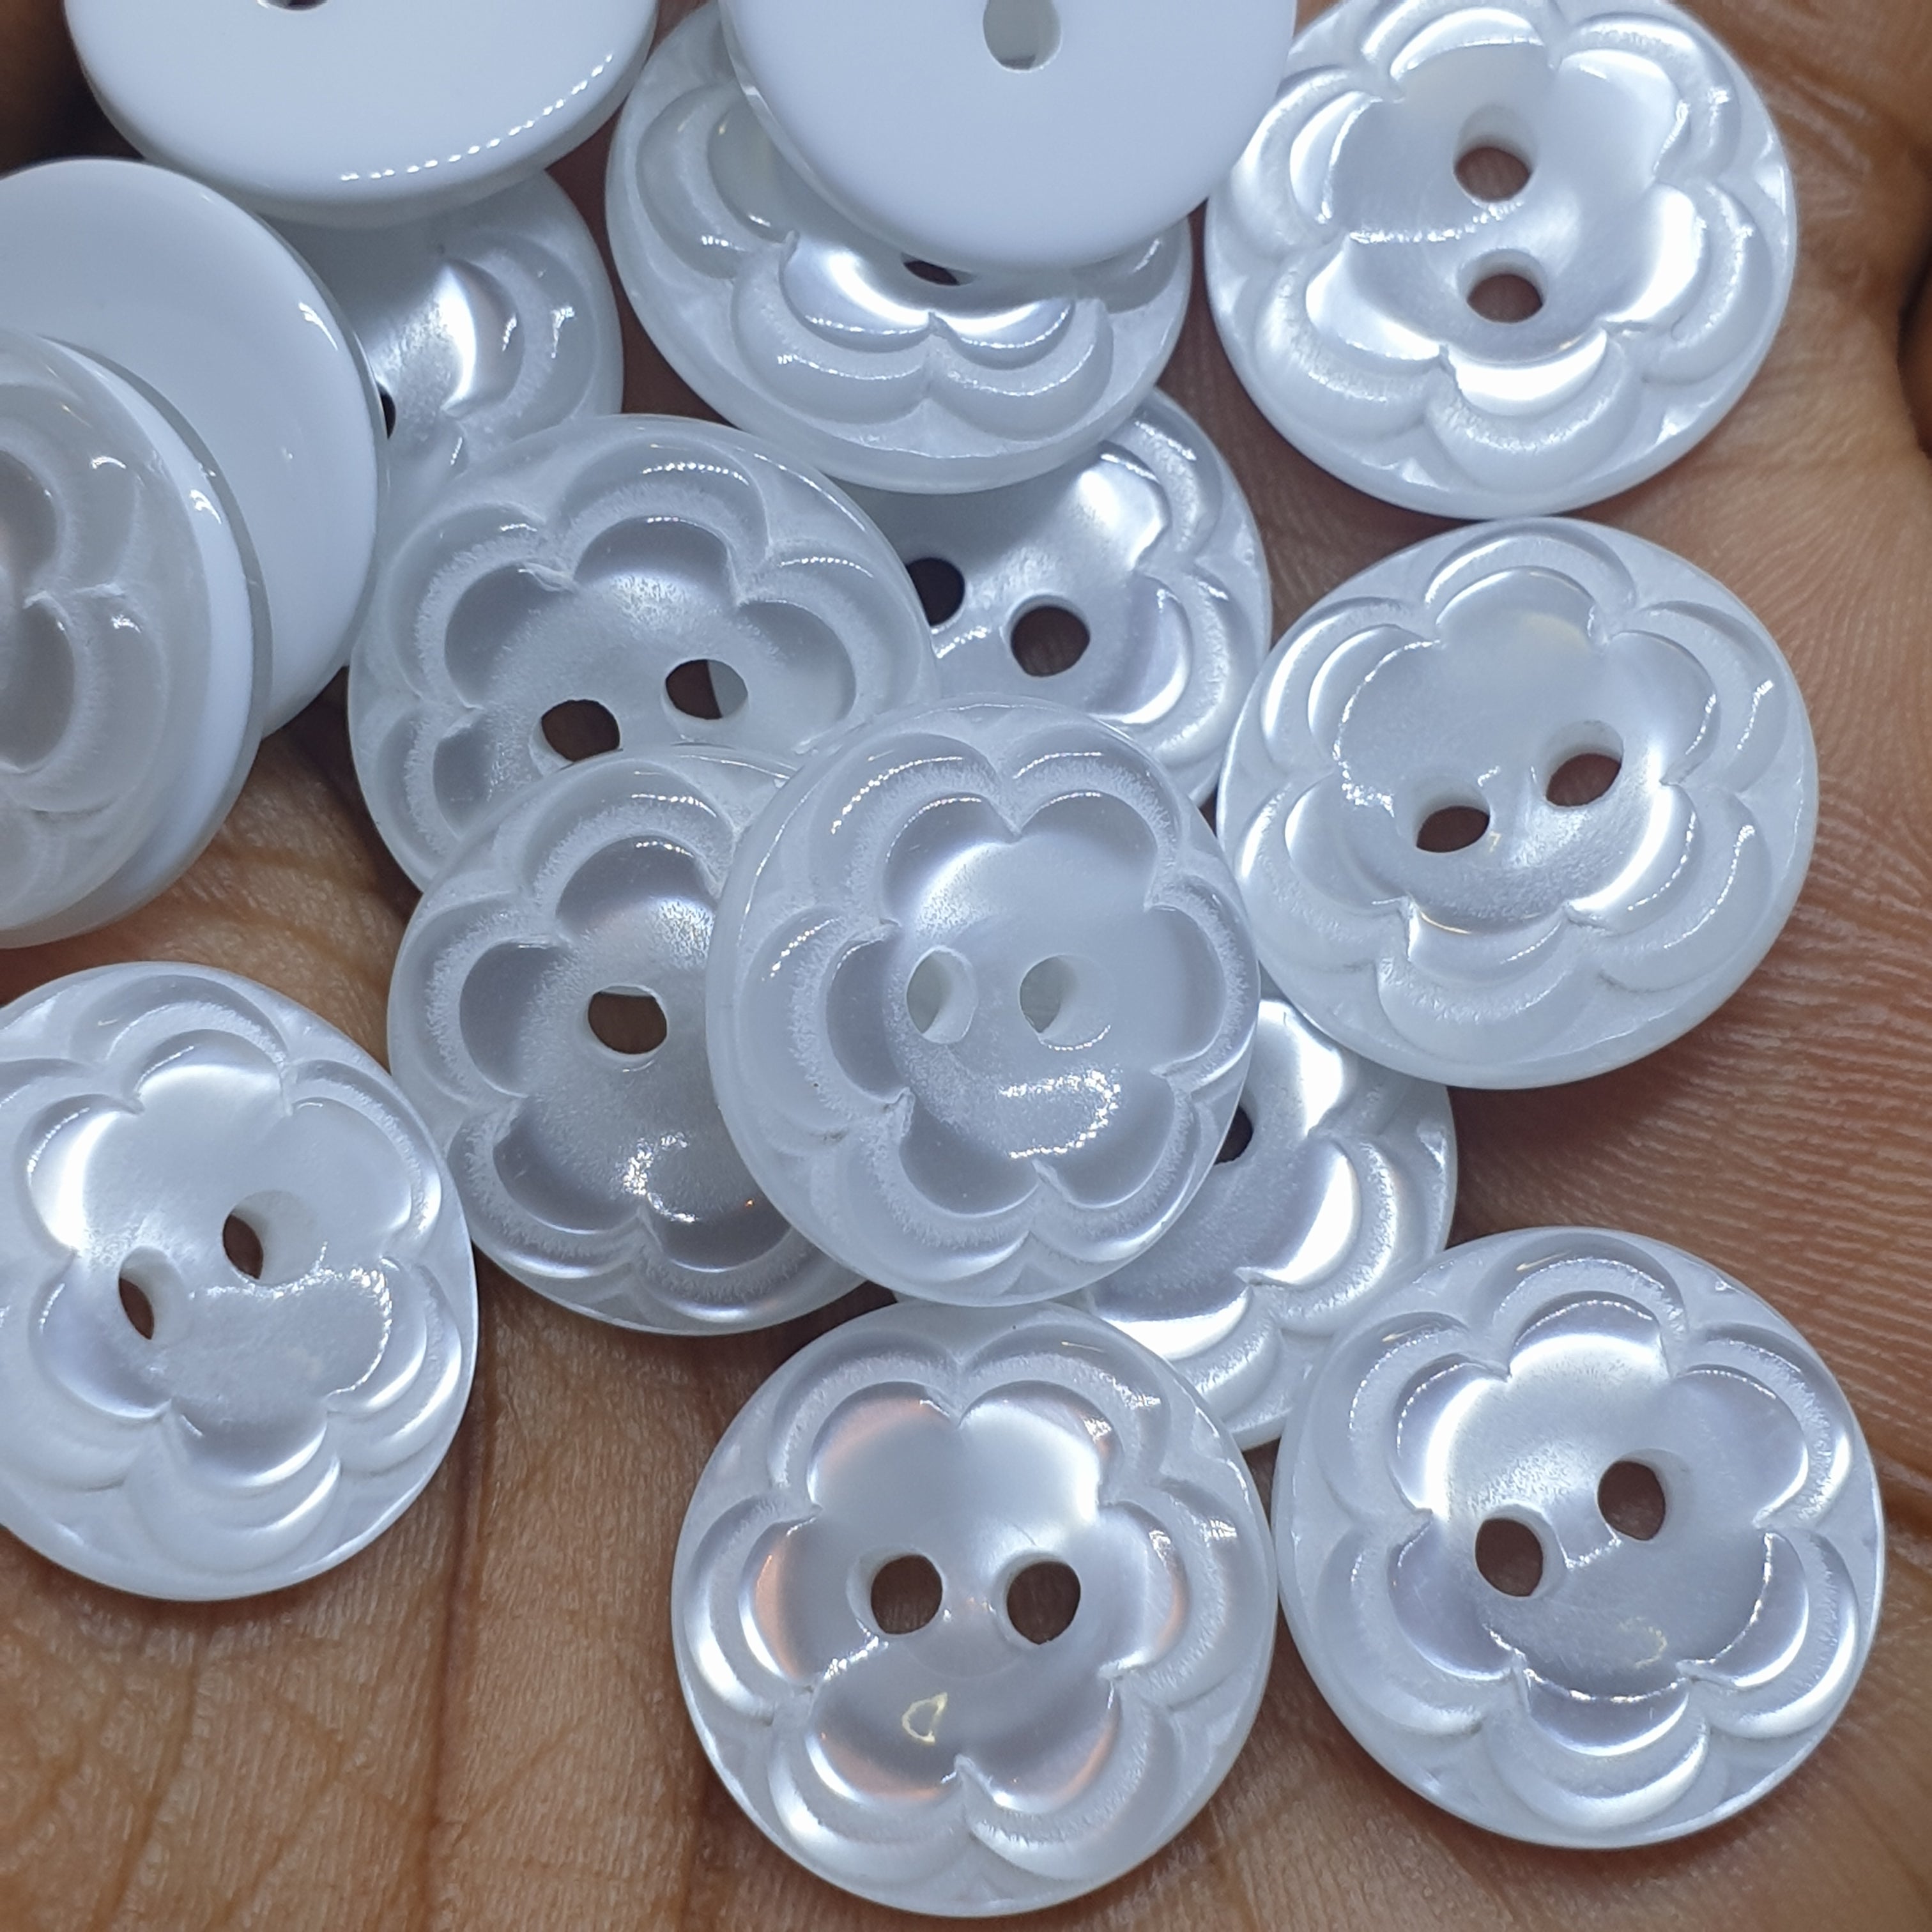 MajorCrafts 40pcs 15mm White Flower Pattern 2 Holes Small Round Resin Sewing Buttons